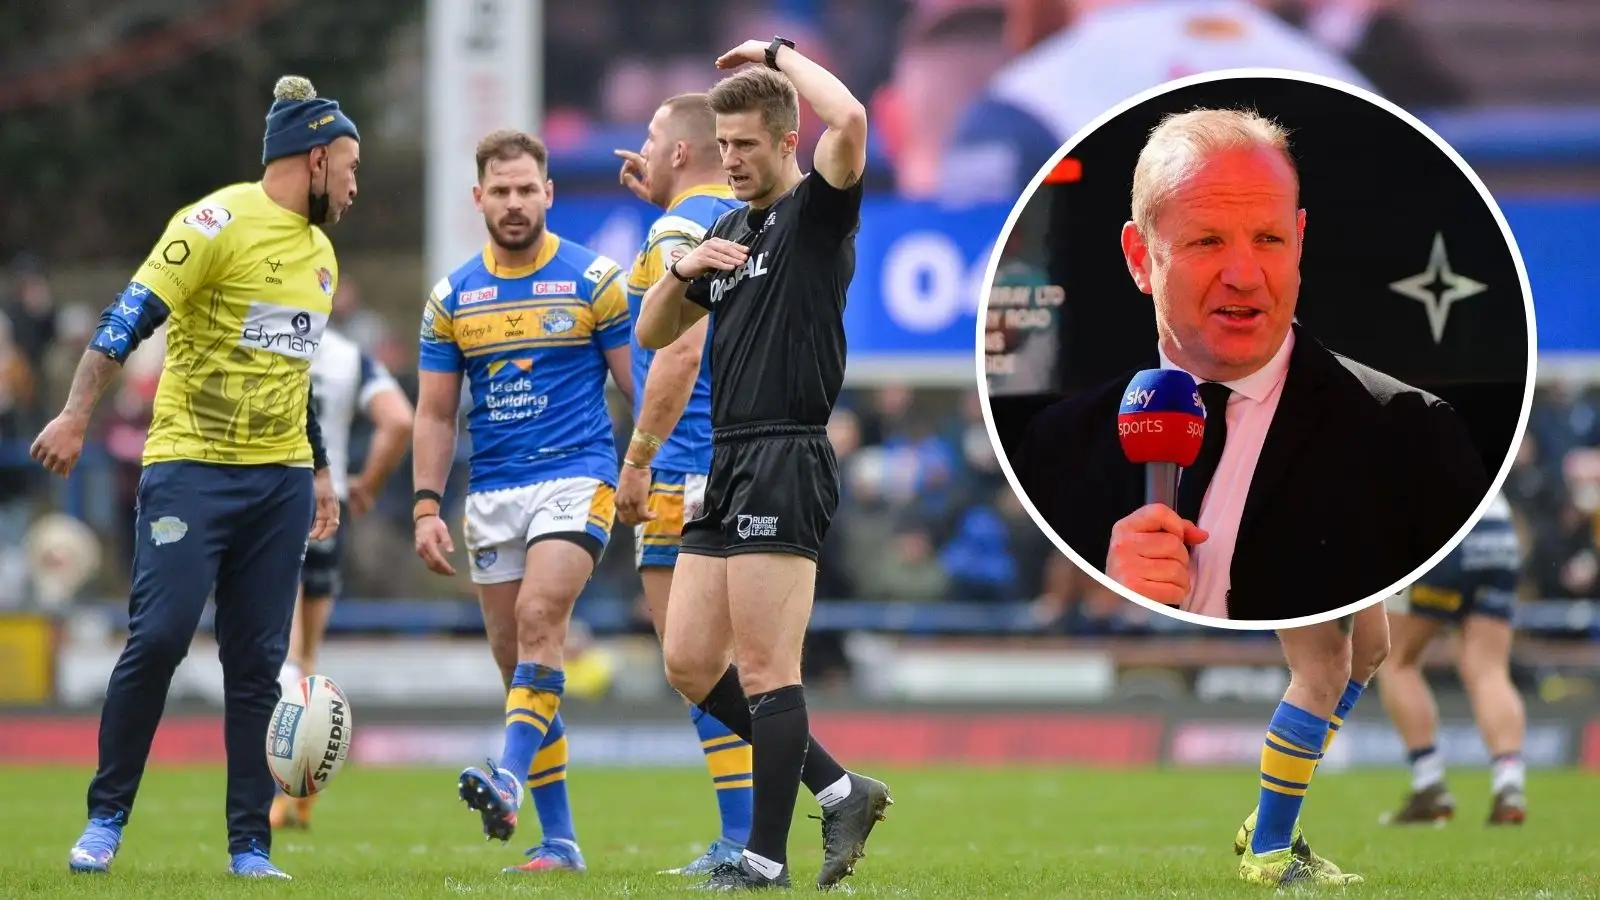 Exclusive: Terry O’Connor concerned about major law changes – ‘We’ve got to be very careful in how we want the game to look’